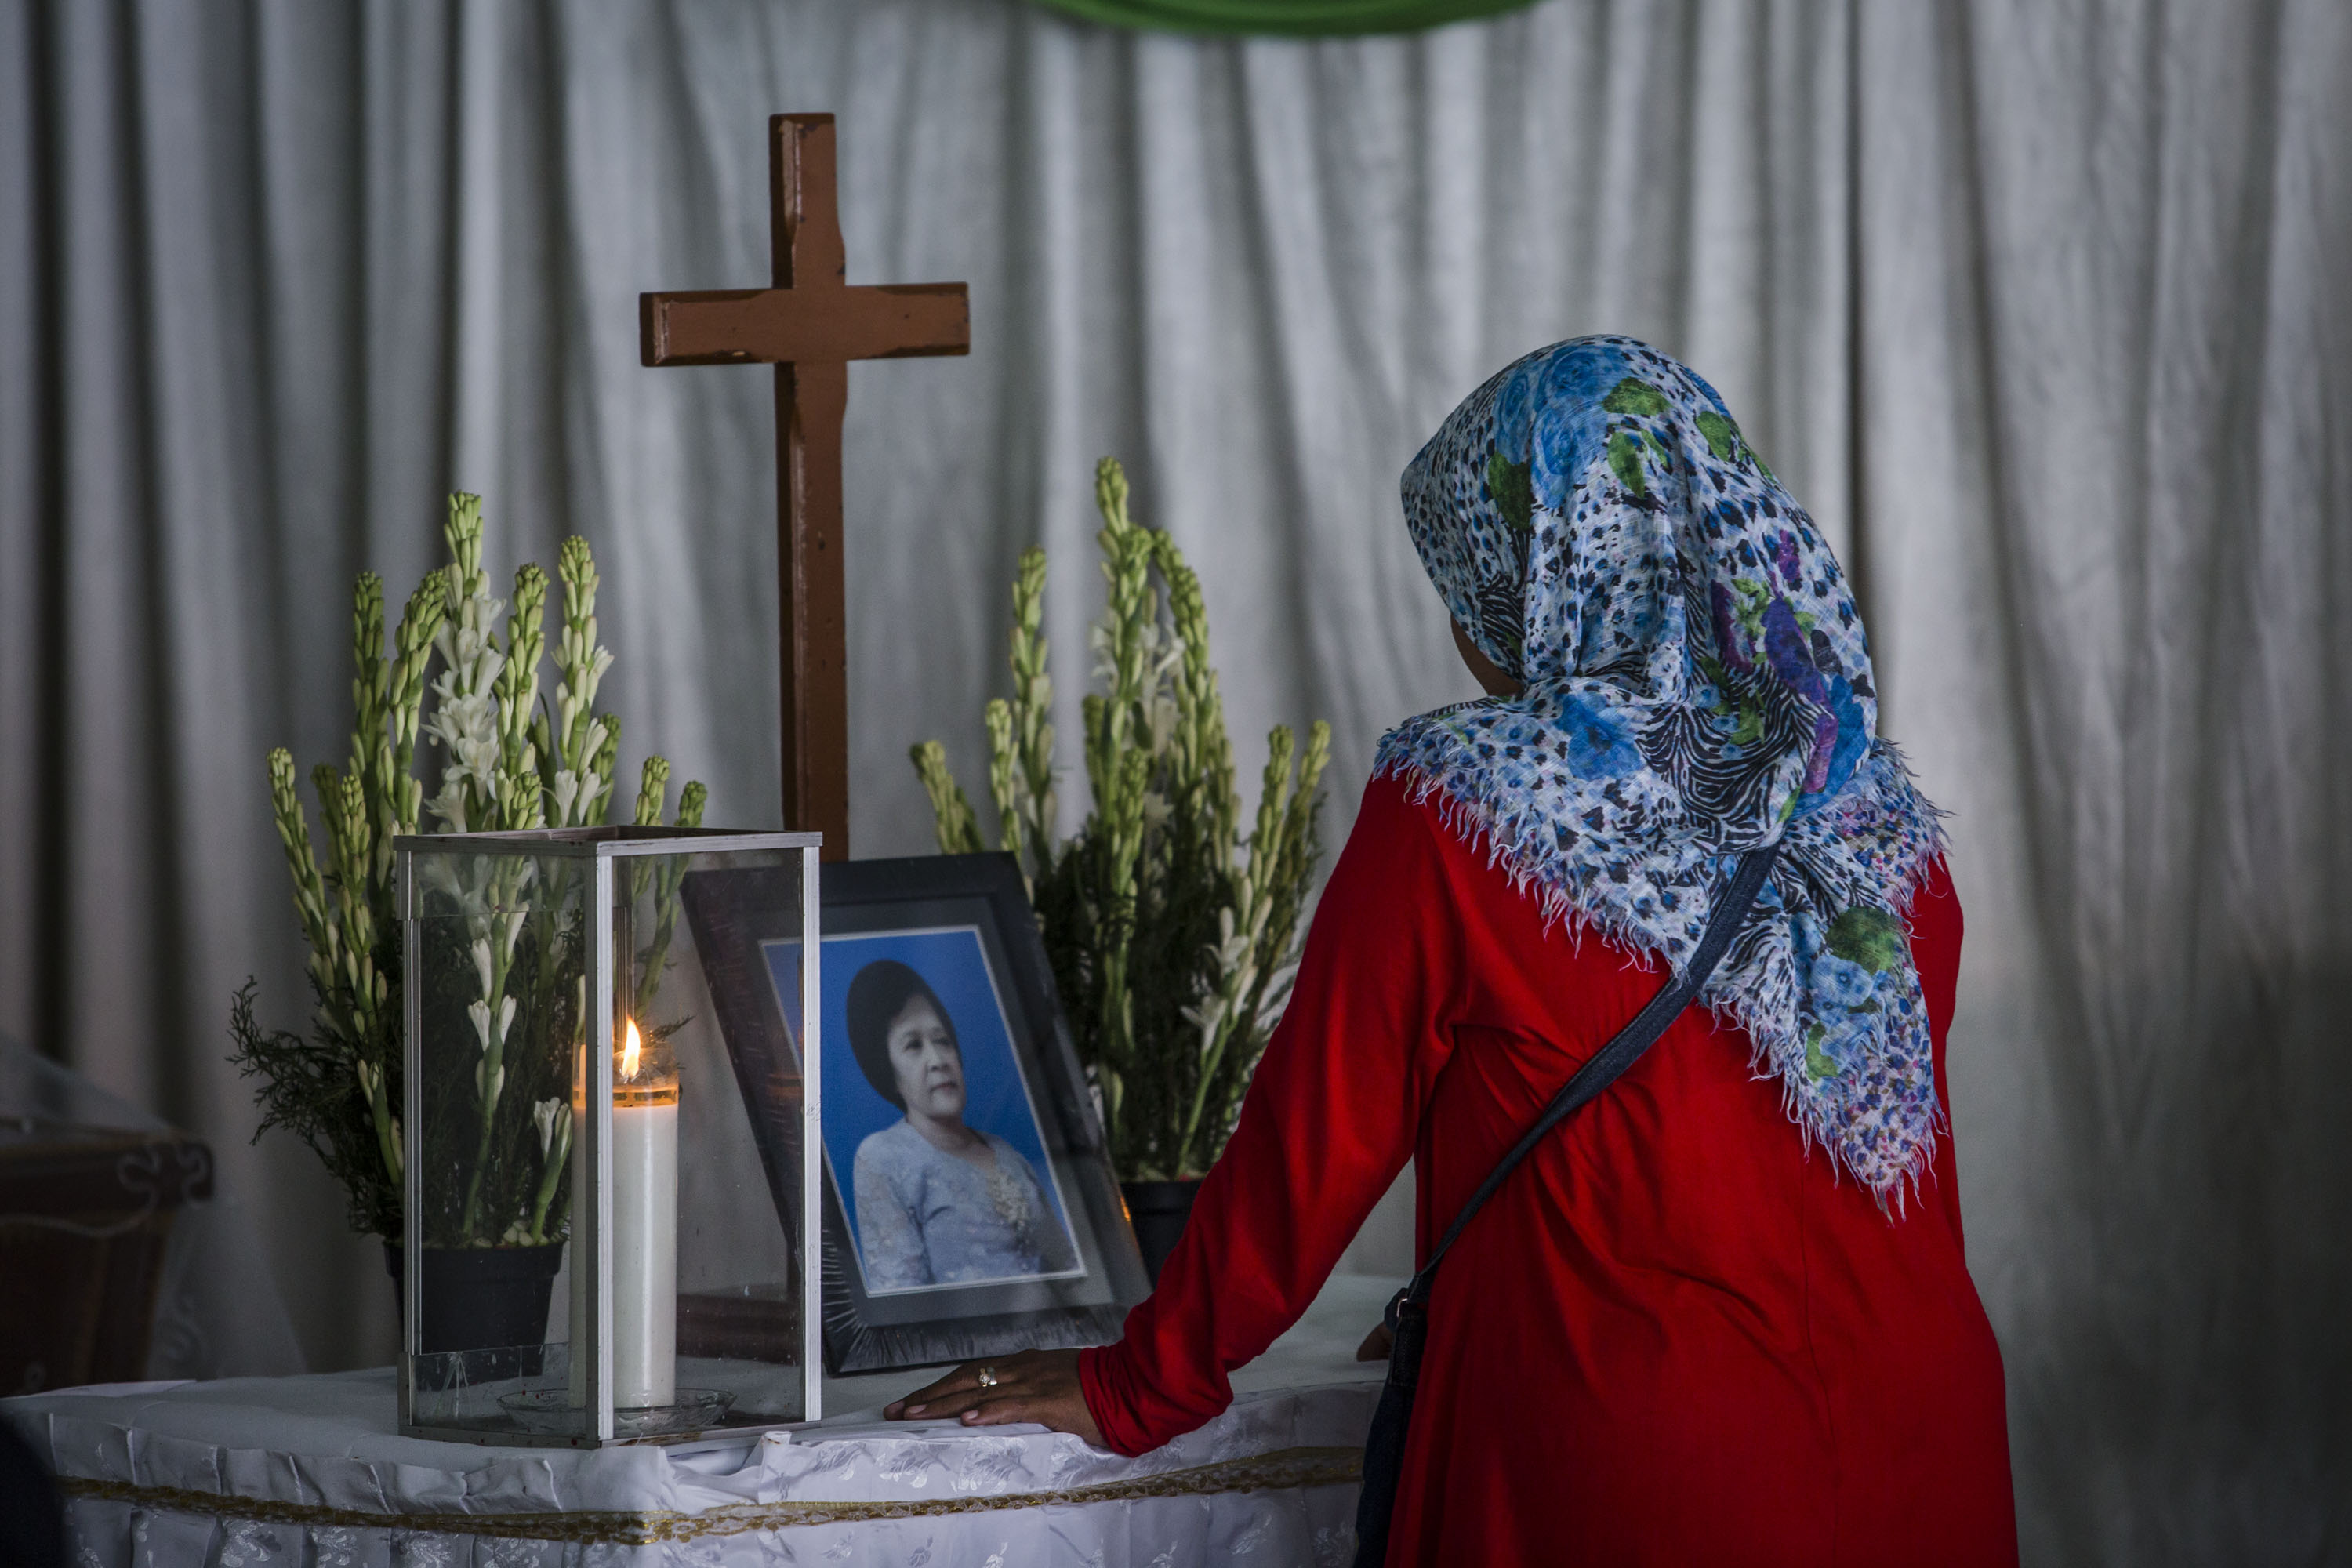 Yuliastuti, grieves in front coffin of Sri Puji, one of the victims killed at Surabaya Centre Pentecostal Church attack, following a blast at the church a day earlier on May 14, 2018 in Surabaya, Indonesia. (Ulet Ifansasti—Getty Images)